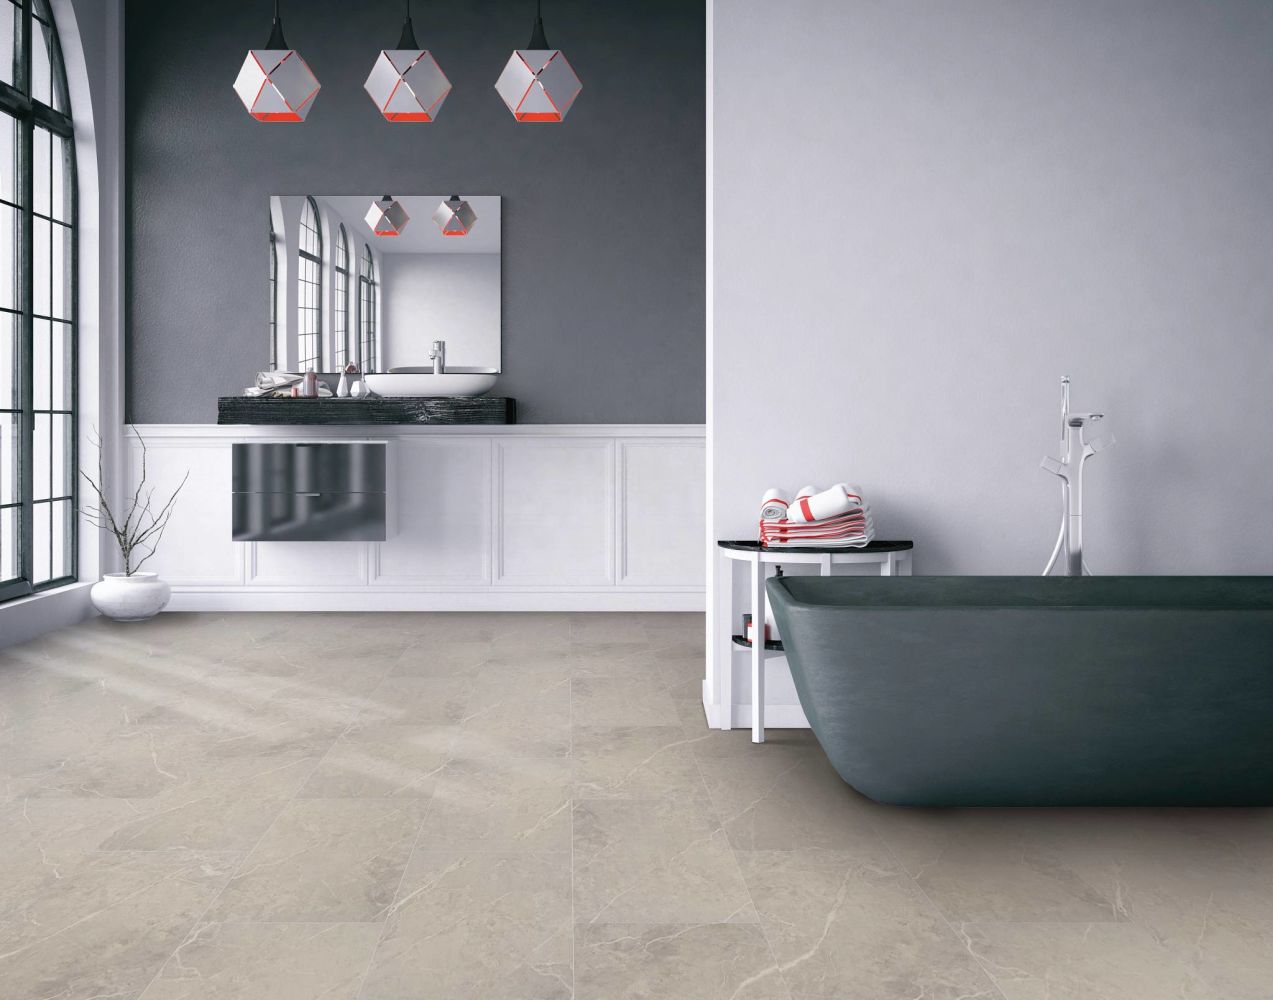 Shaw Floors Resilient Residential Ct Stone 18x24m Minerva 18248_567CT